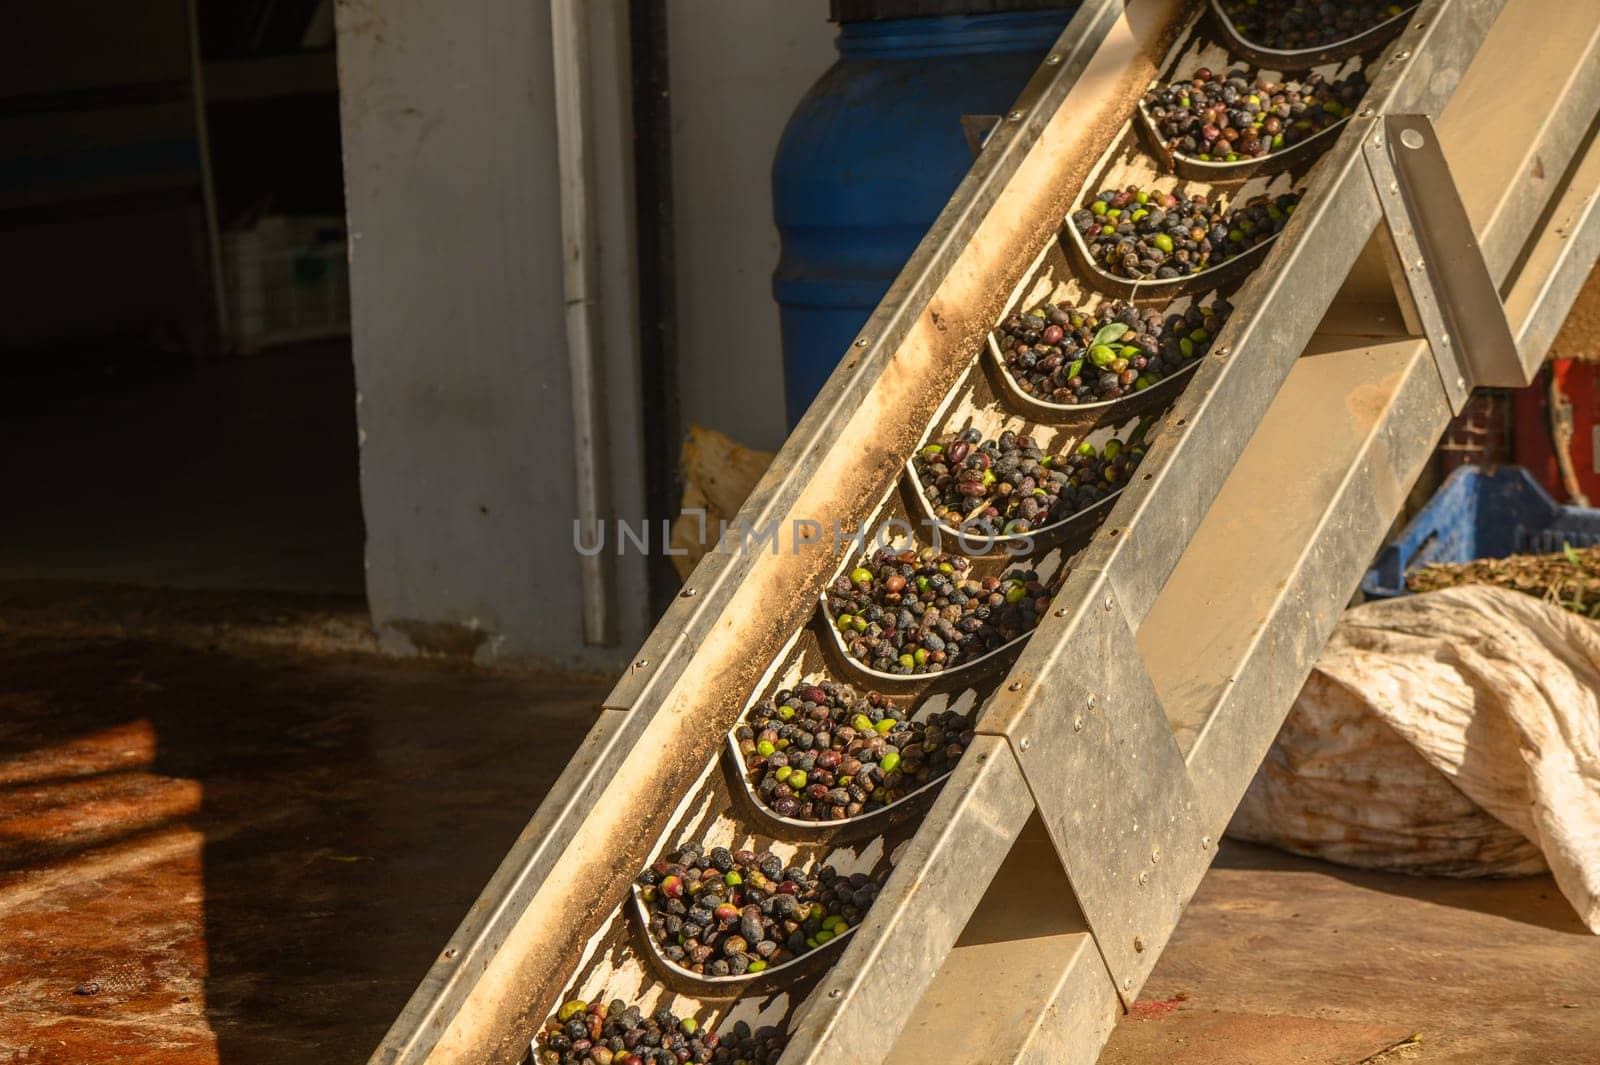 olives are transported from a bunker to an olive oil pressing plant 3 by Mixa74